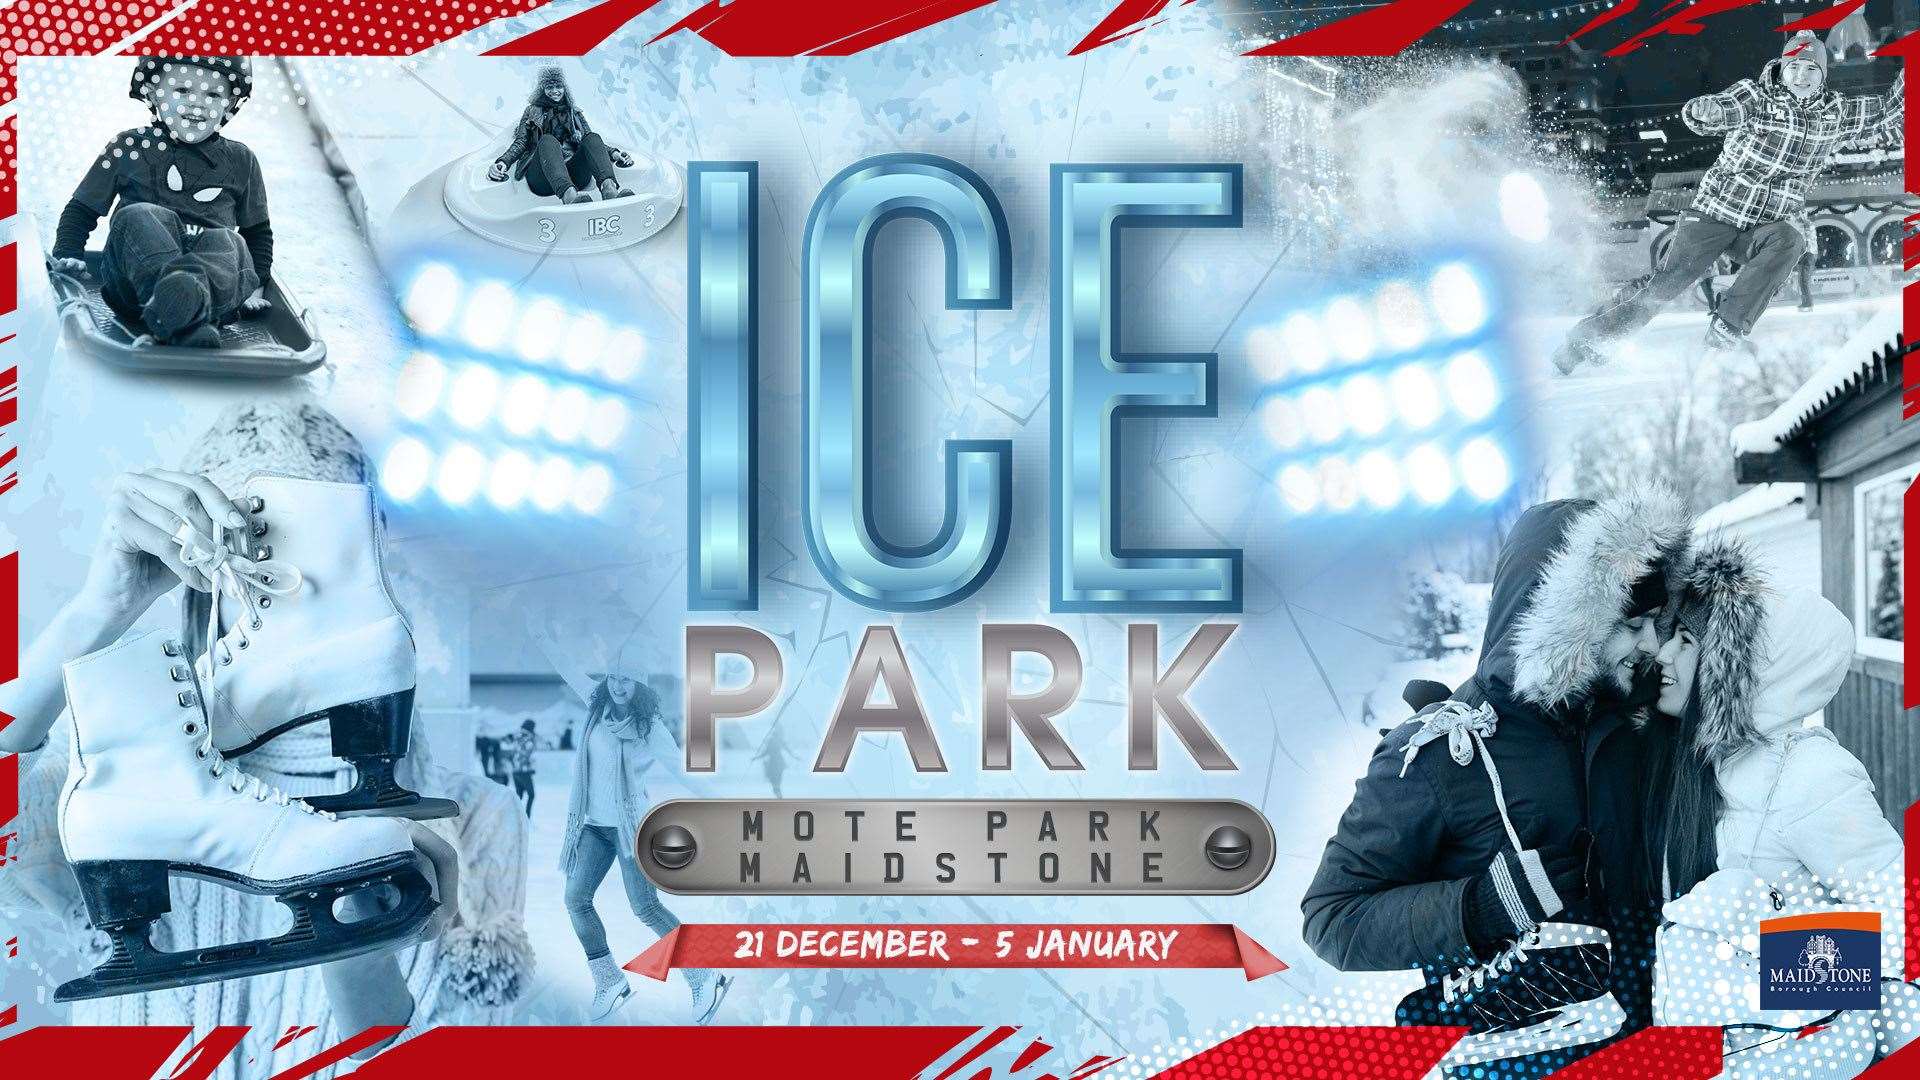 An Ice Park will not be coming to Maidstone this Christmas